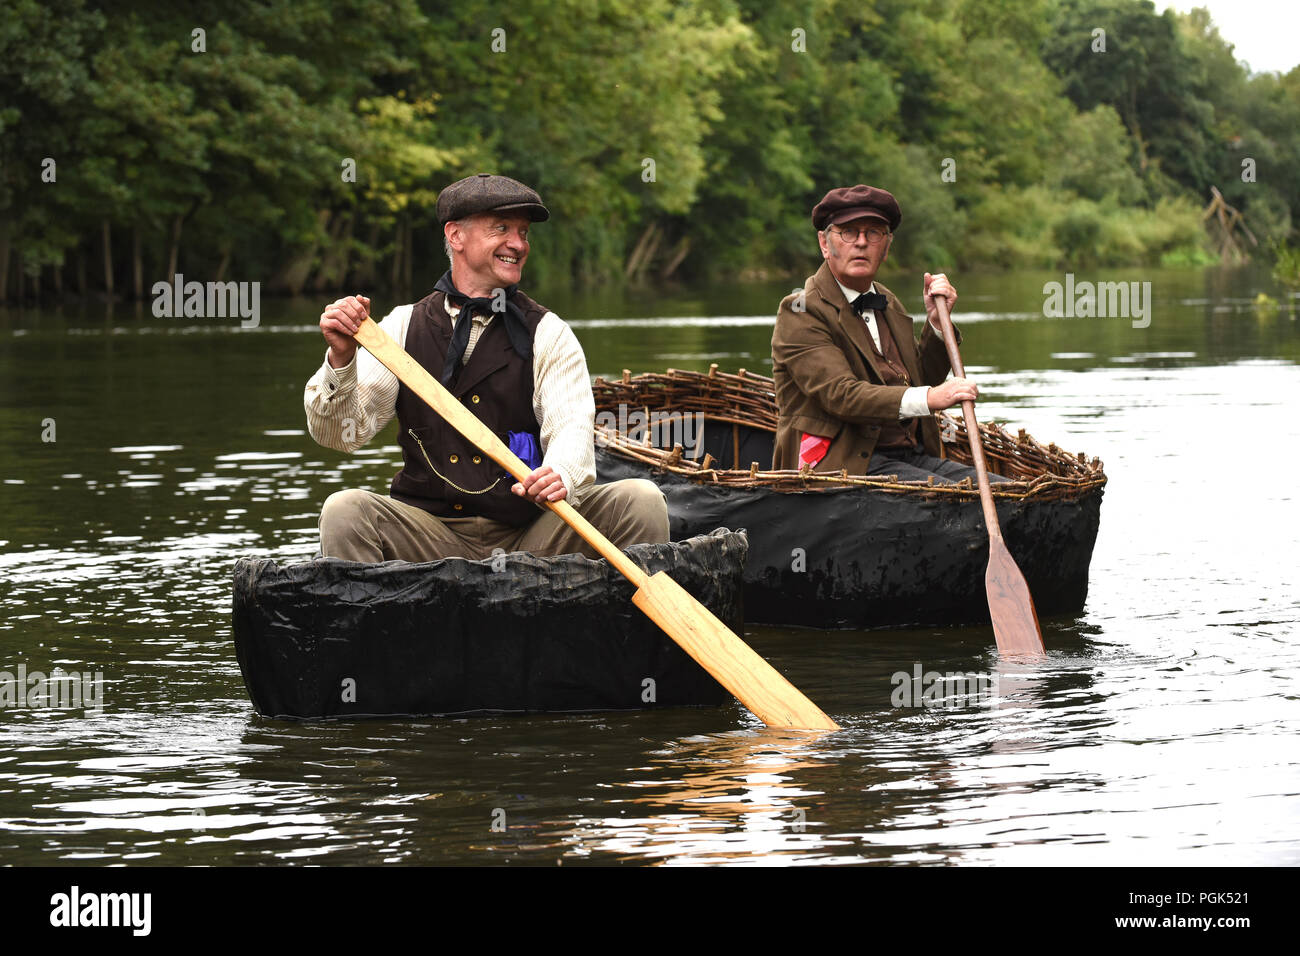 Time for a bit of nostalgia from coracle makers Richard Taylor and Conwy Richards at the annual bank Holiday Coracle regatta on the River Severn in Ironbridge. Credit: David Bagnall/Alamy Live News Stock Photo